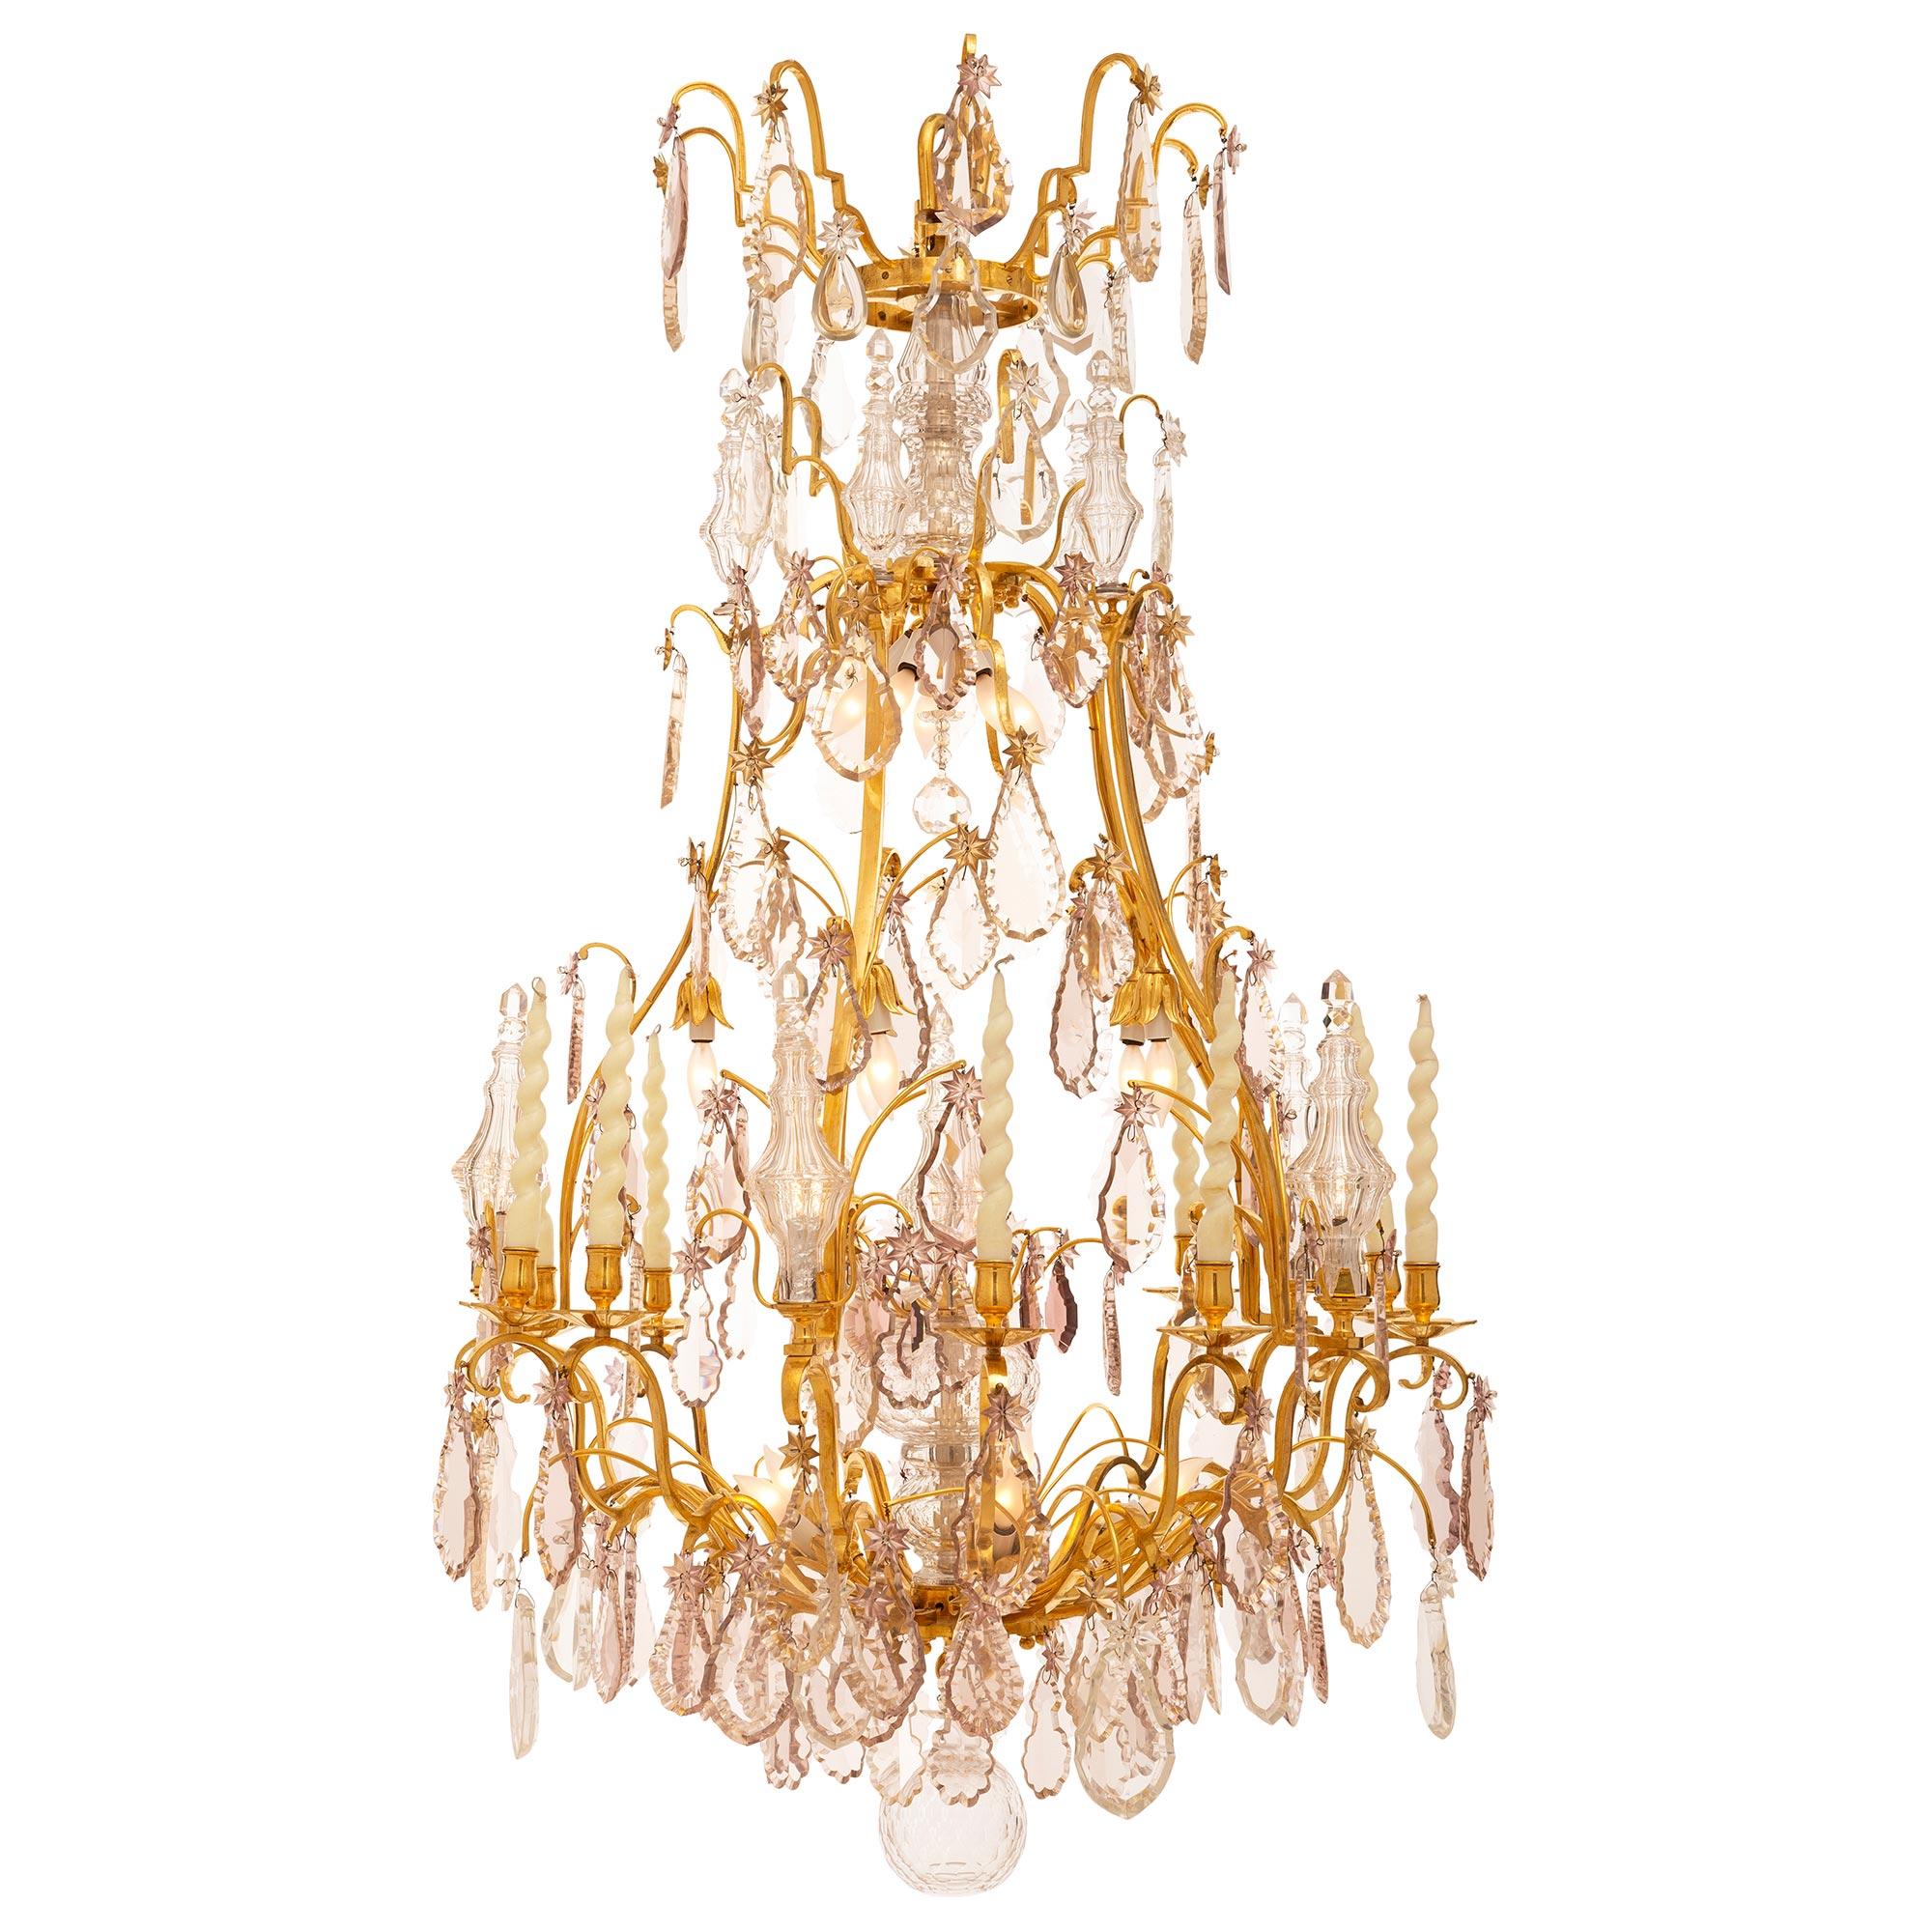 A sensational and extremely high quality French 18th century Louis XV period ormolu and crystal chandelier. The chandelier is centered by a charming and finely cut hand blown crystal ball below a tier of cut crystal pendants. Each of the fifteen